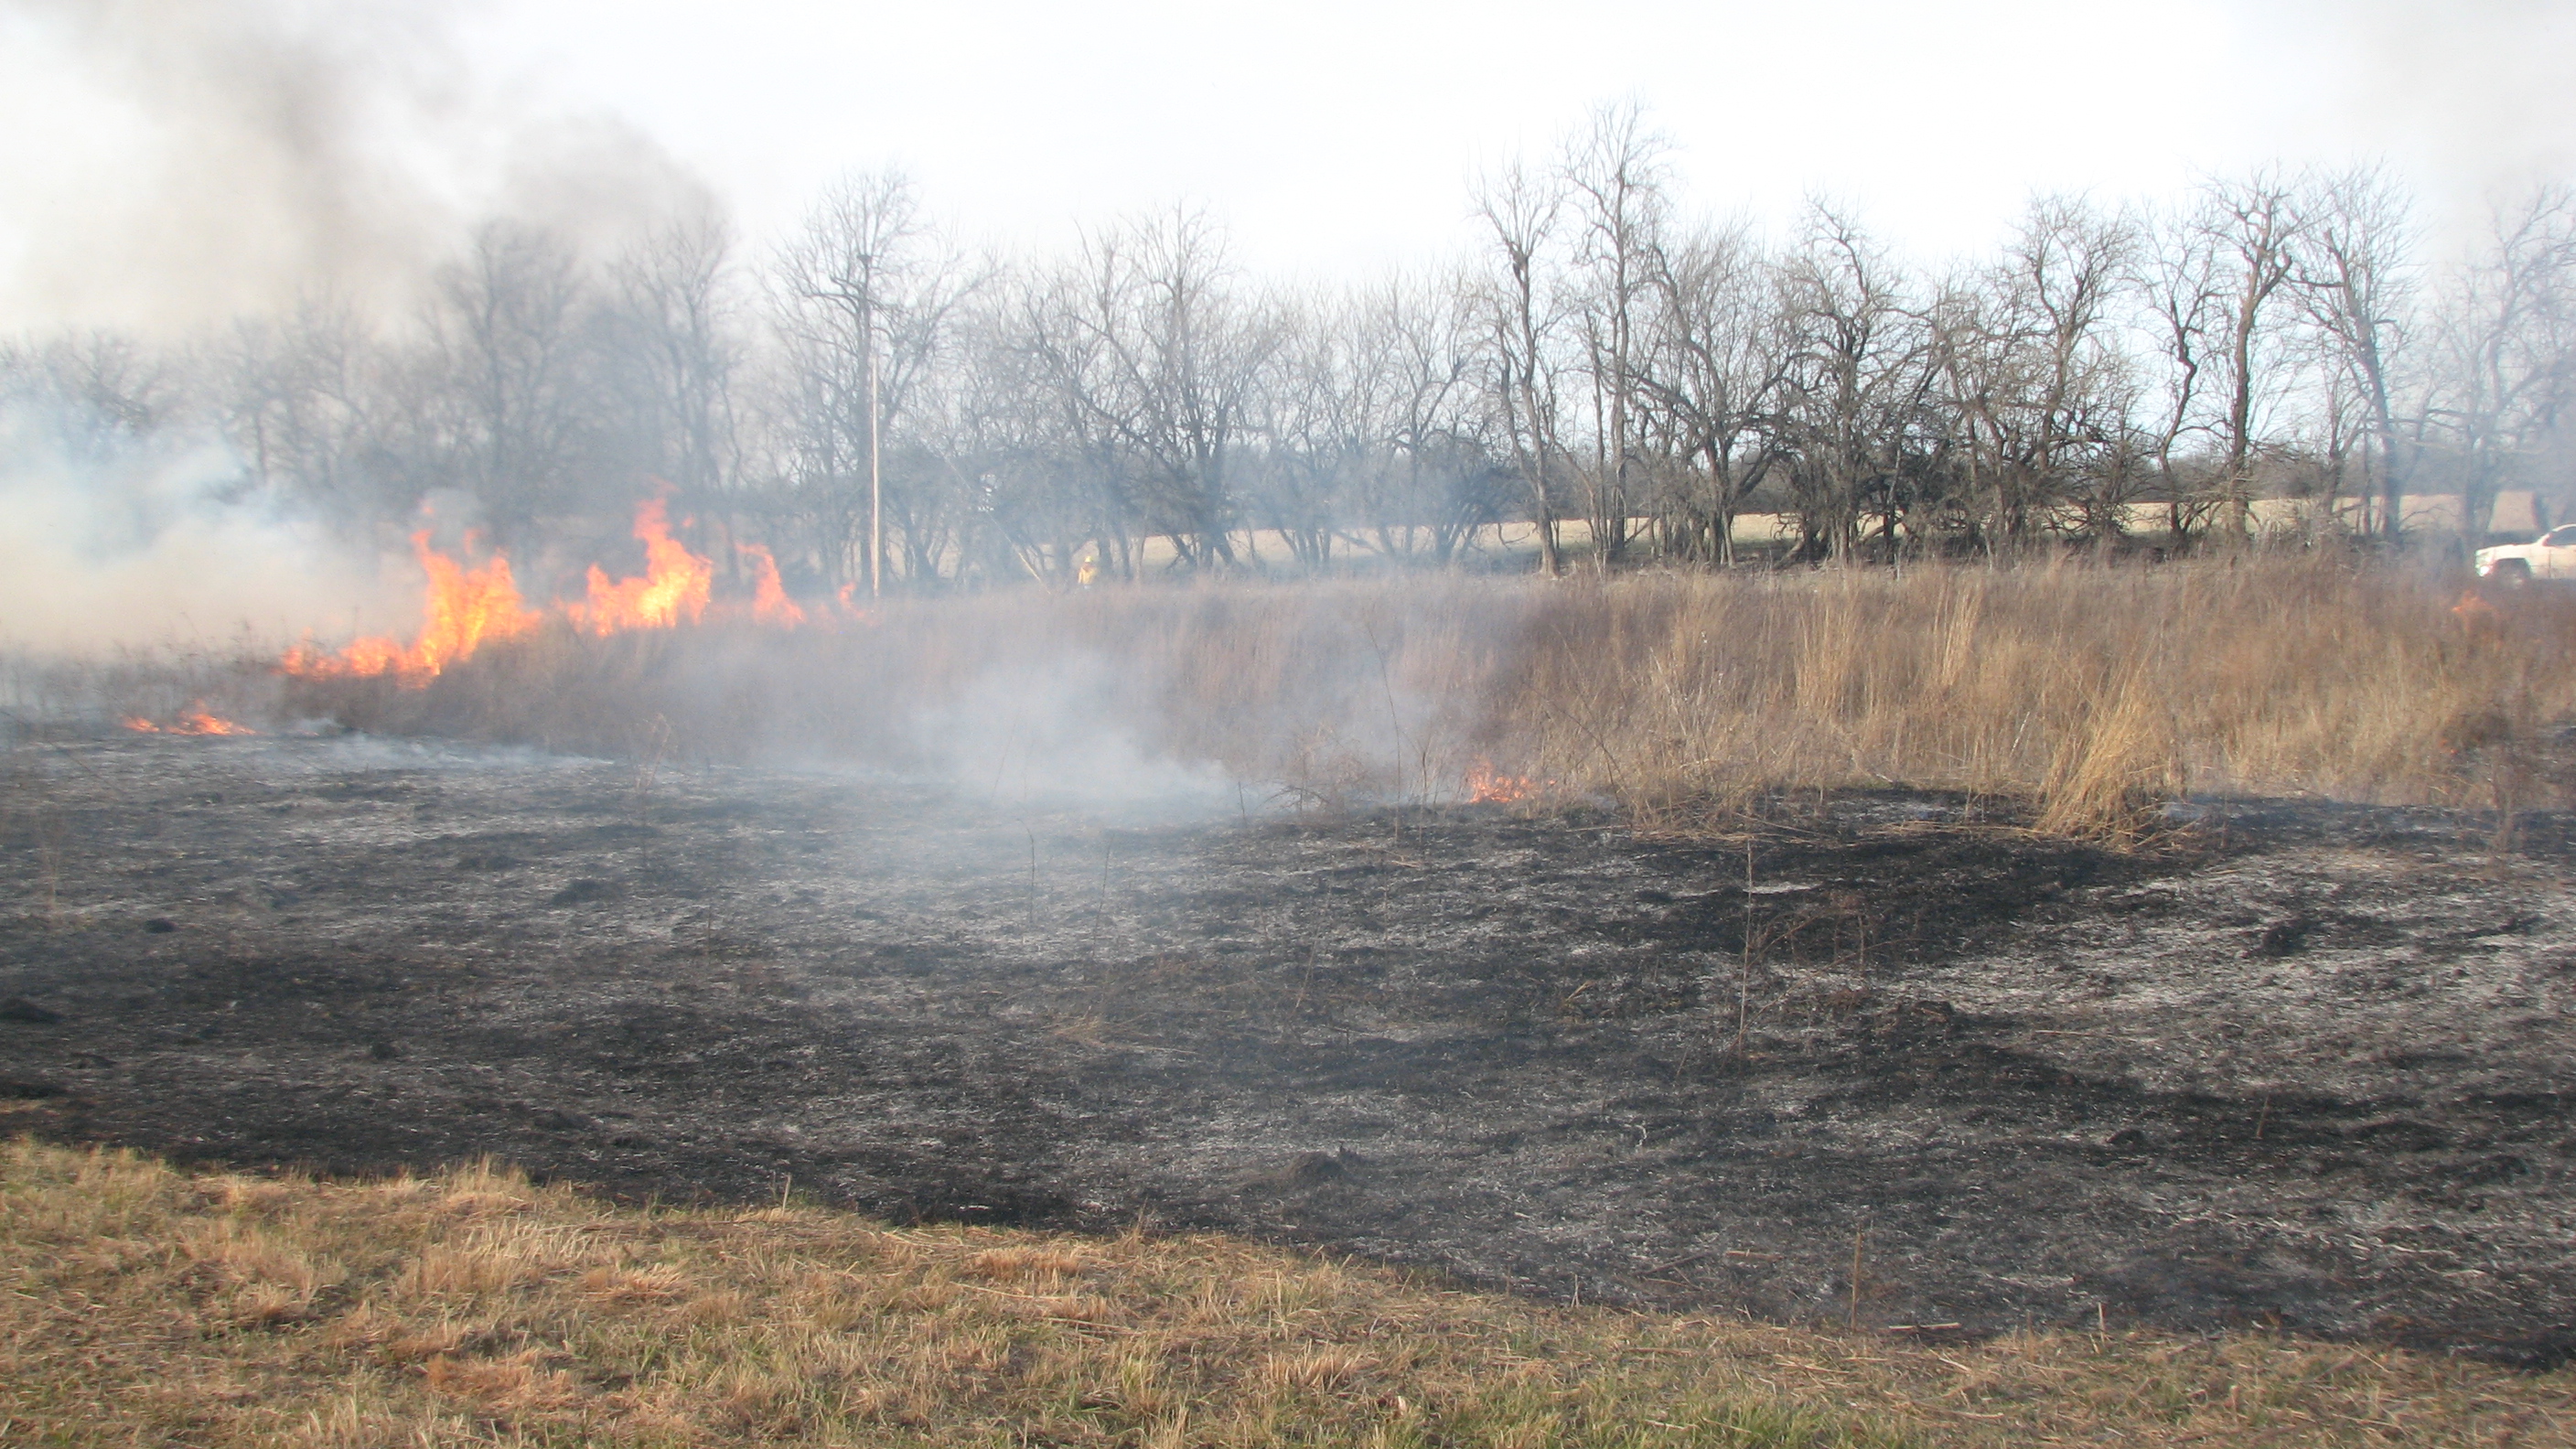 Scorched earth after an Ozark prairie is set ablaze